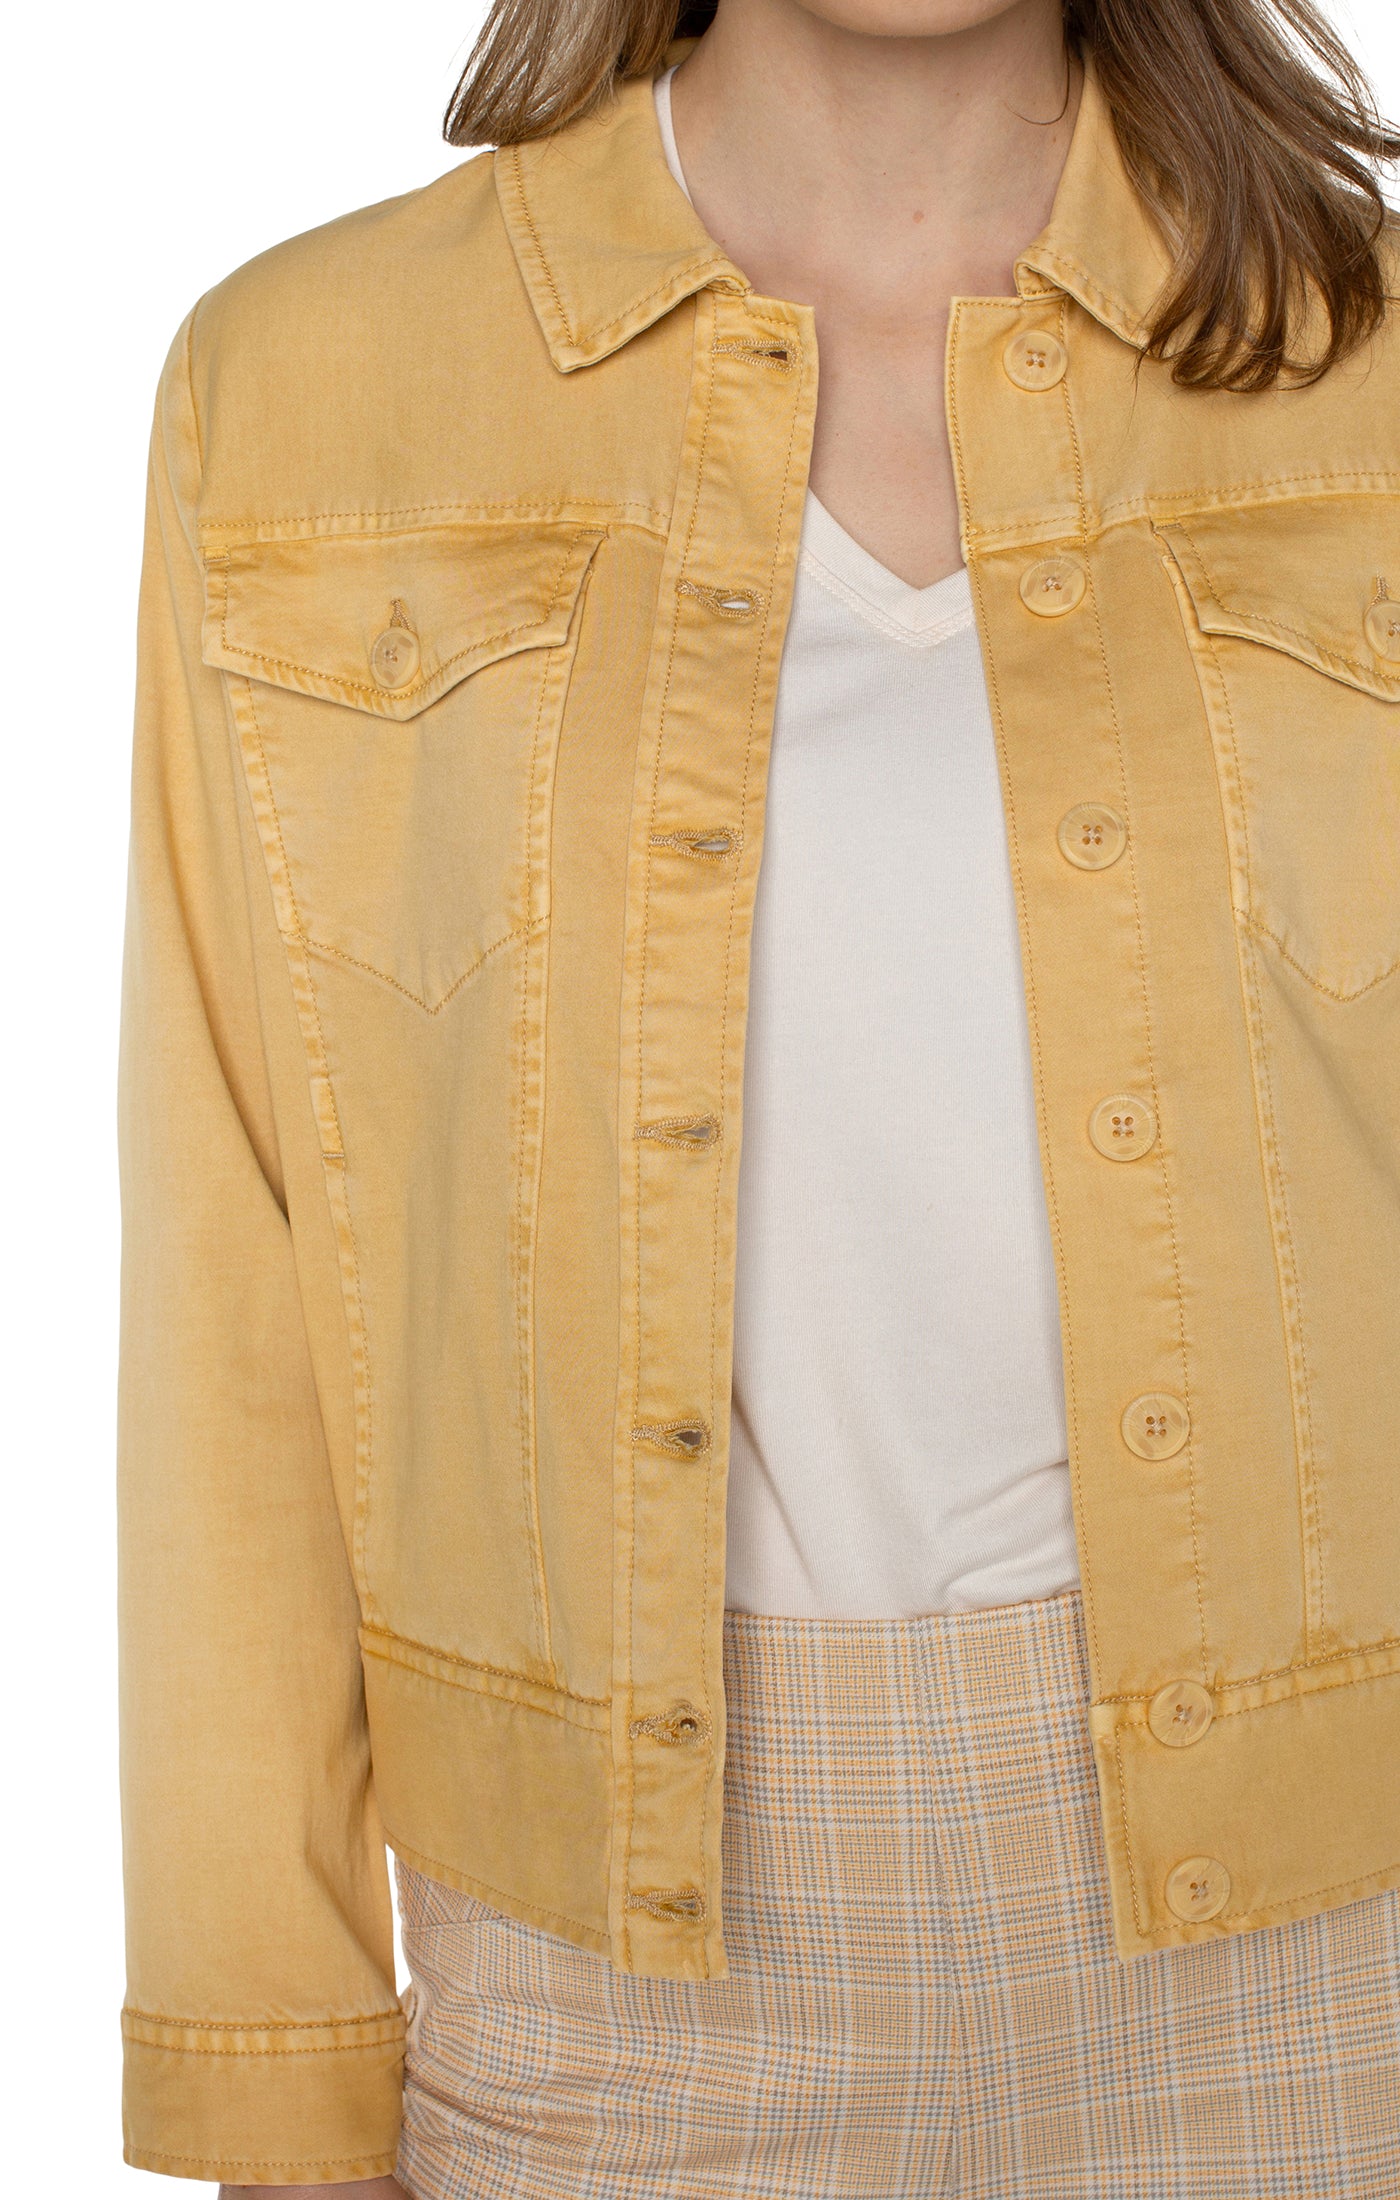 LVP Trucker Jacket with Elastic Back - Flaxen Gold Close Up View